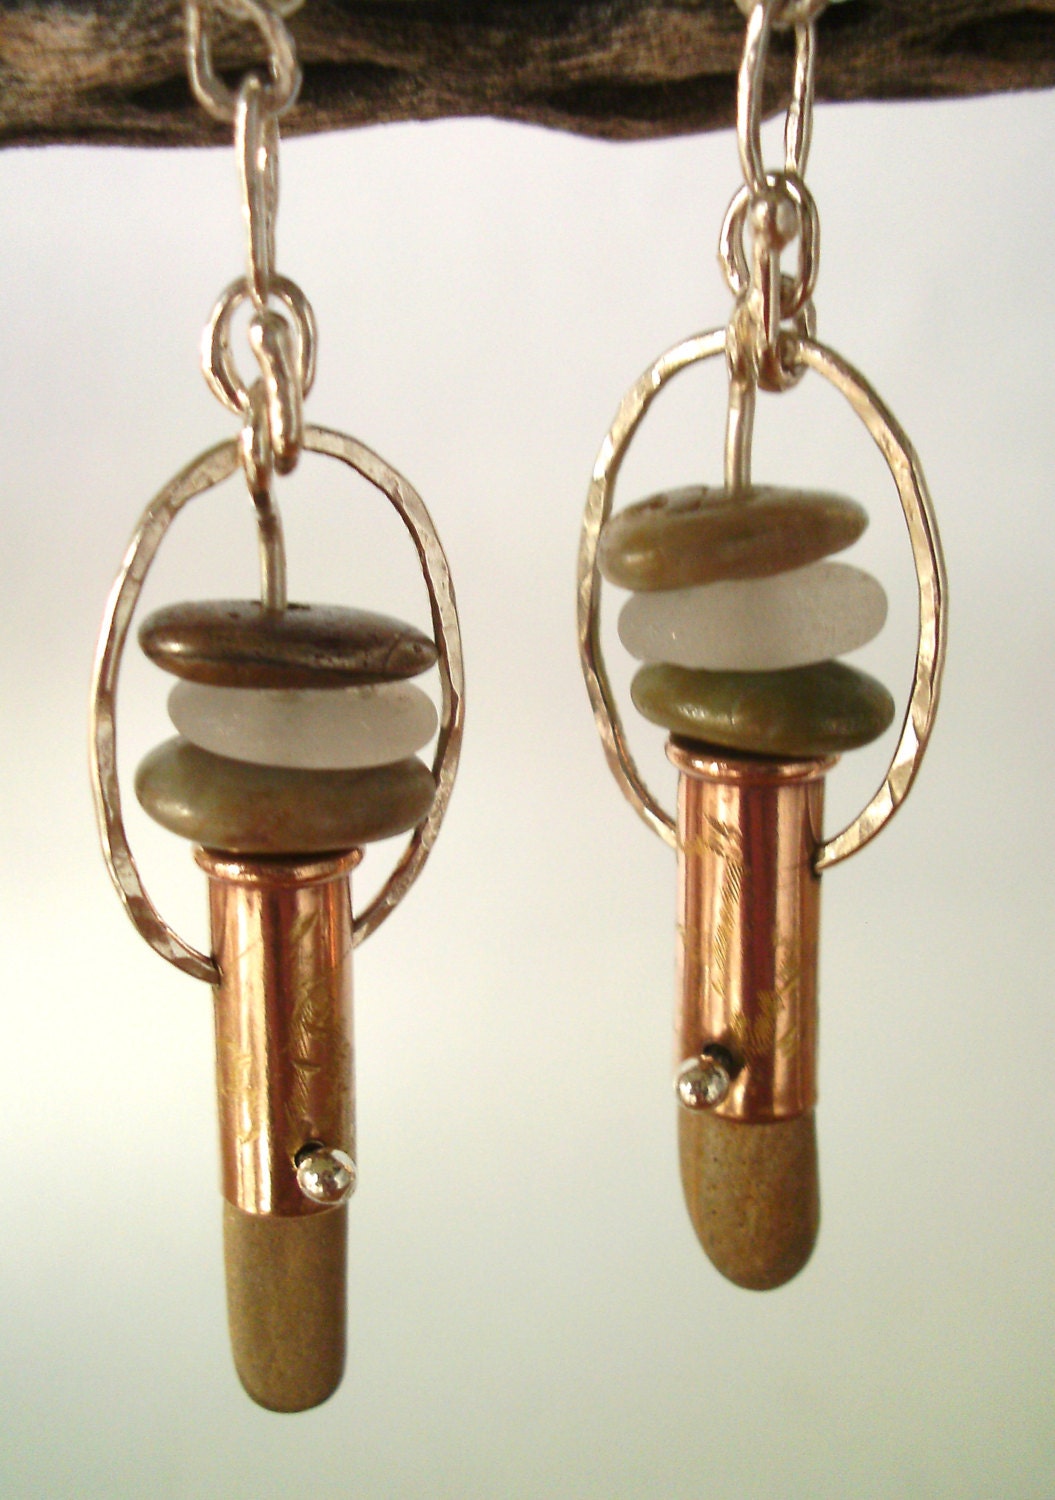 Earrings - Sterling Silver - Bullet Hoop - Beach Stone and Glass - Silversmith - RMD Designs